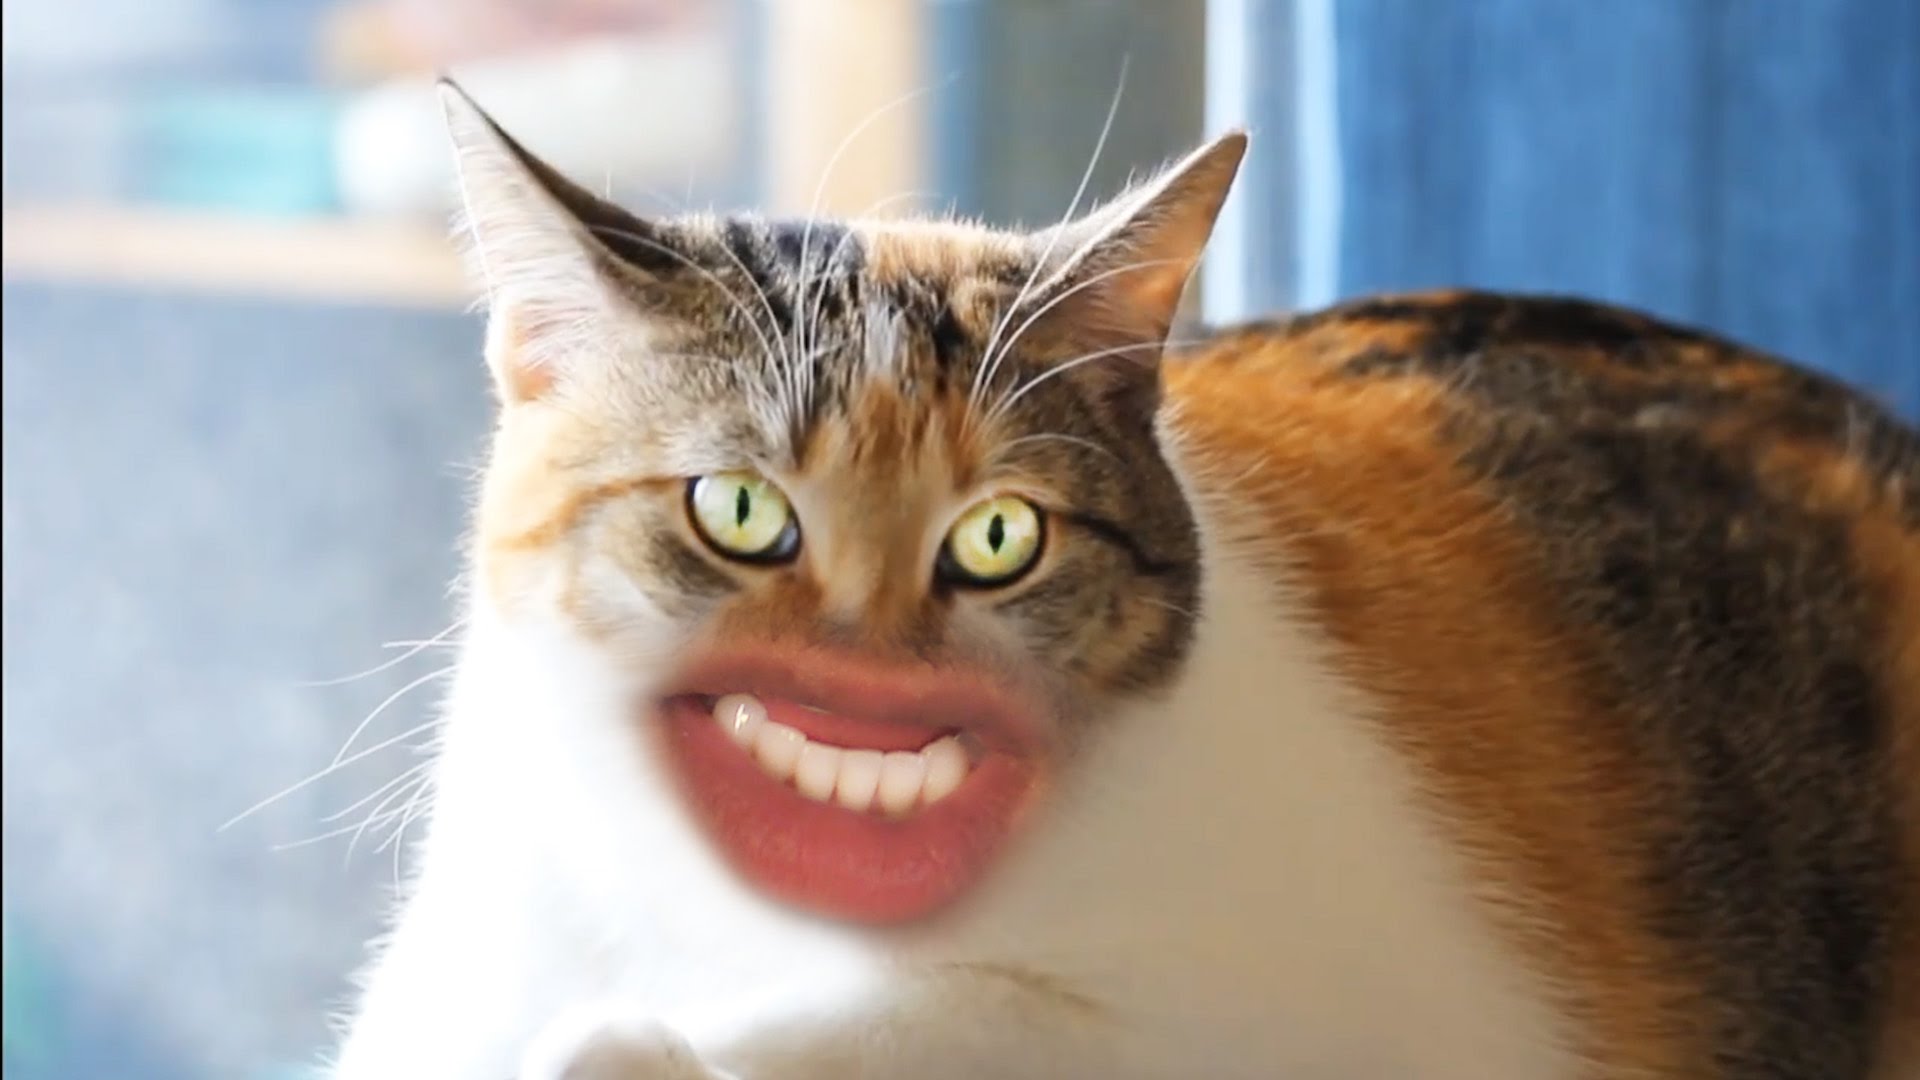 A Ridiculous Video Featuring Cats With Human Mouths Attempting to ...